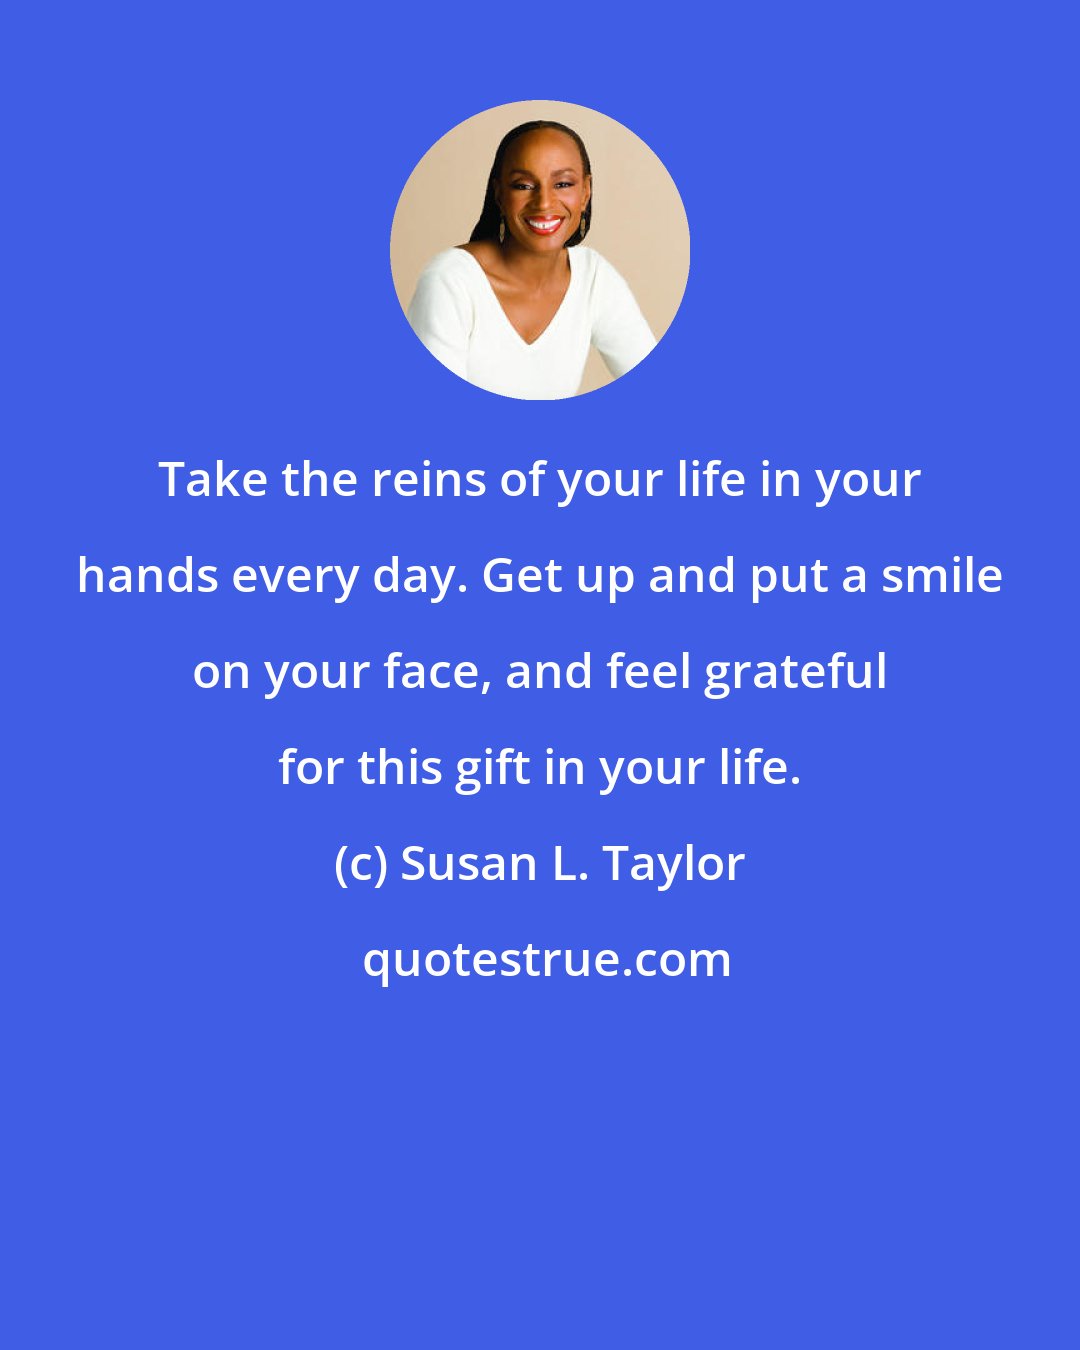 Susan L. Taylor: Take the reins of your life in your hands every day. Get up and put a smile on your face, and feel grateful for this gift in your life.